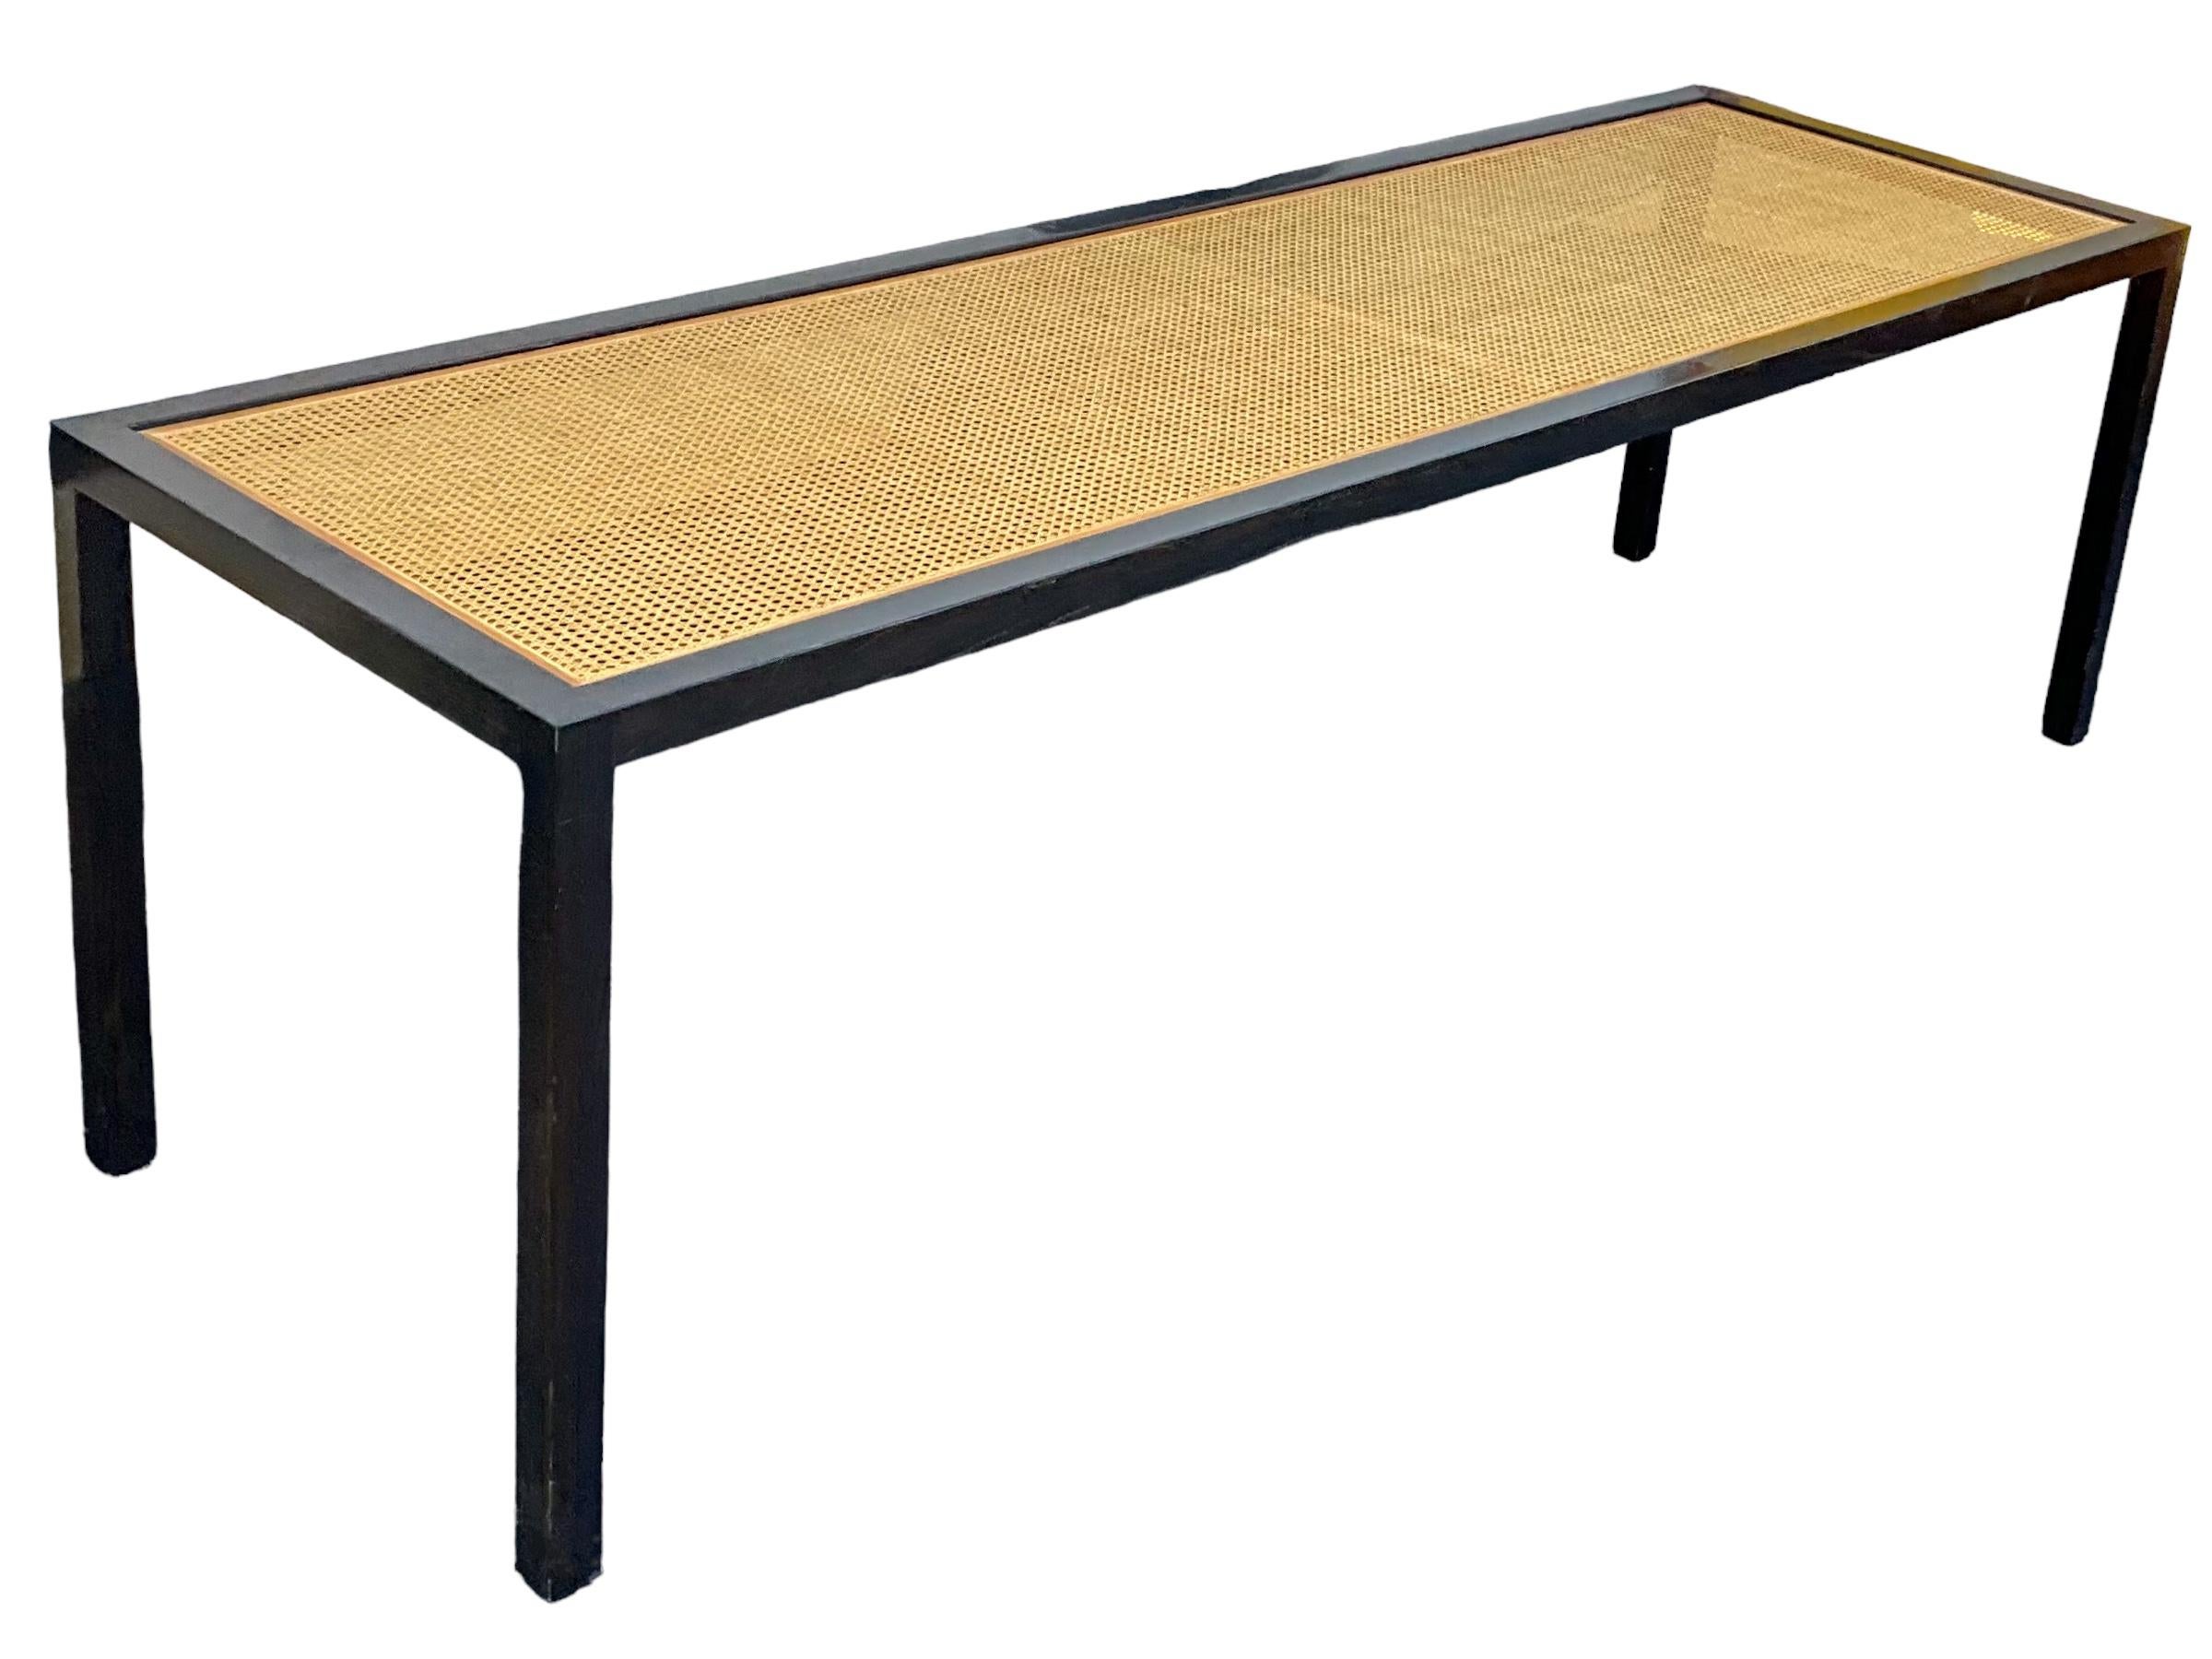 Organic Modern Glass & Cane Top Danny Ho Fong Style Dining Table / Desk  In Good Condition For Sale In Kennesaw, GA